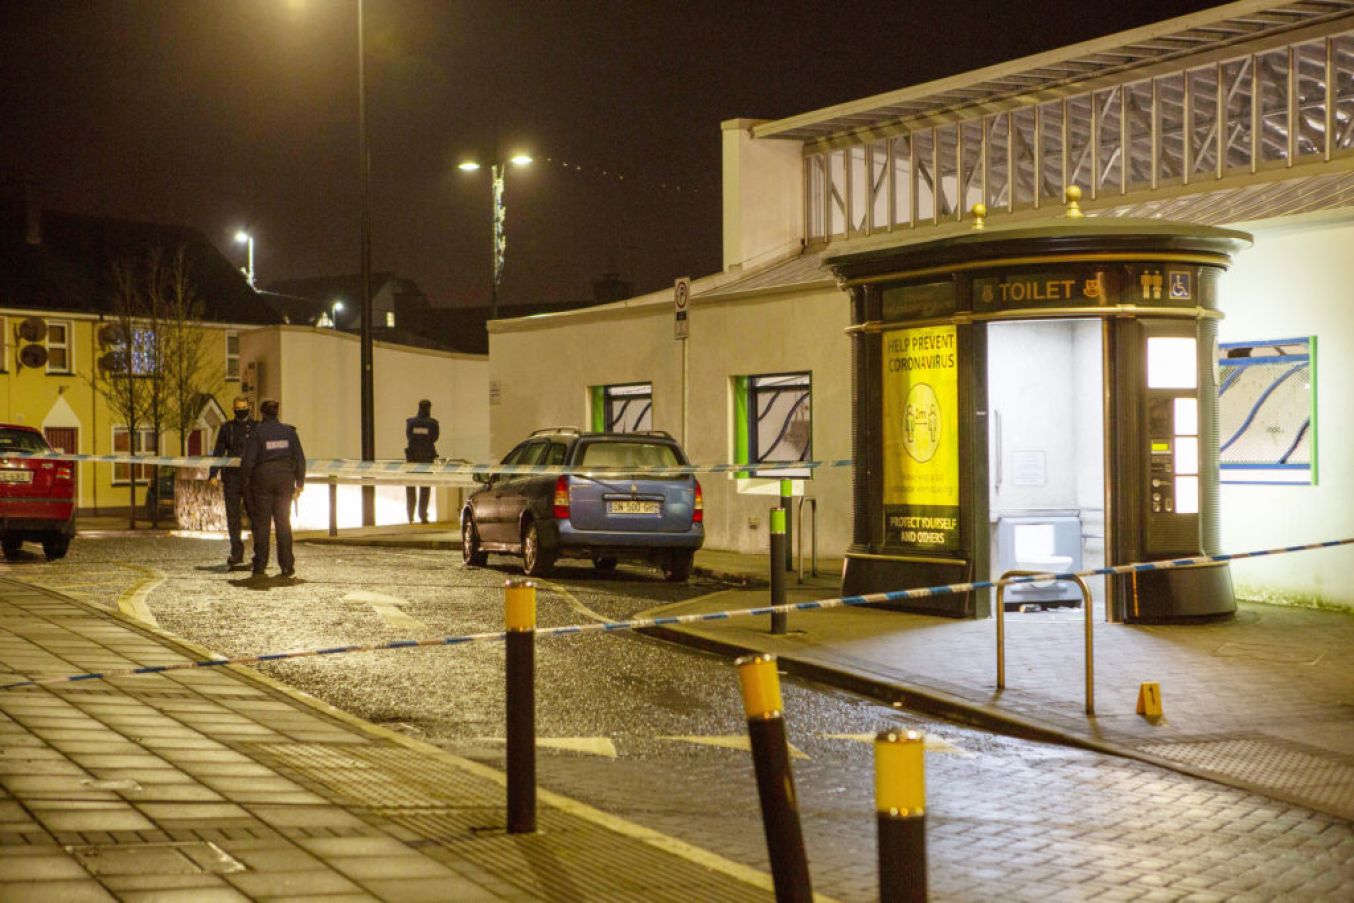 28/1/2021  A Young Woman Is Fighting For Her Life In Hospital After She Was Viciously Assaulted In Ennis, Co Clare. Gardaí Have Sealed Off A Scene In The Market Area Of The Town Following The Incident Which Is Understood To Have Occurred Shortly After 6.00Pm. Photograph Press 22